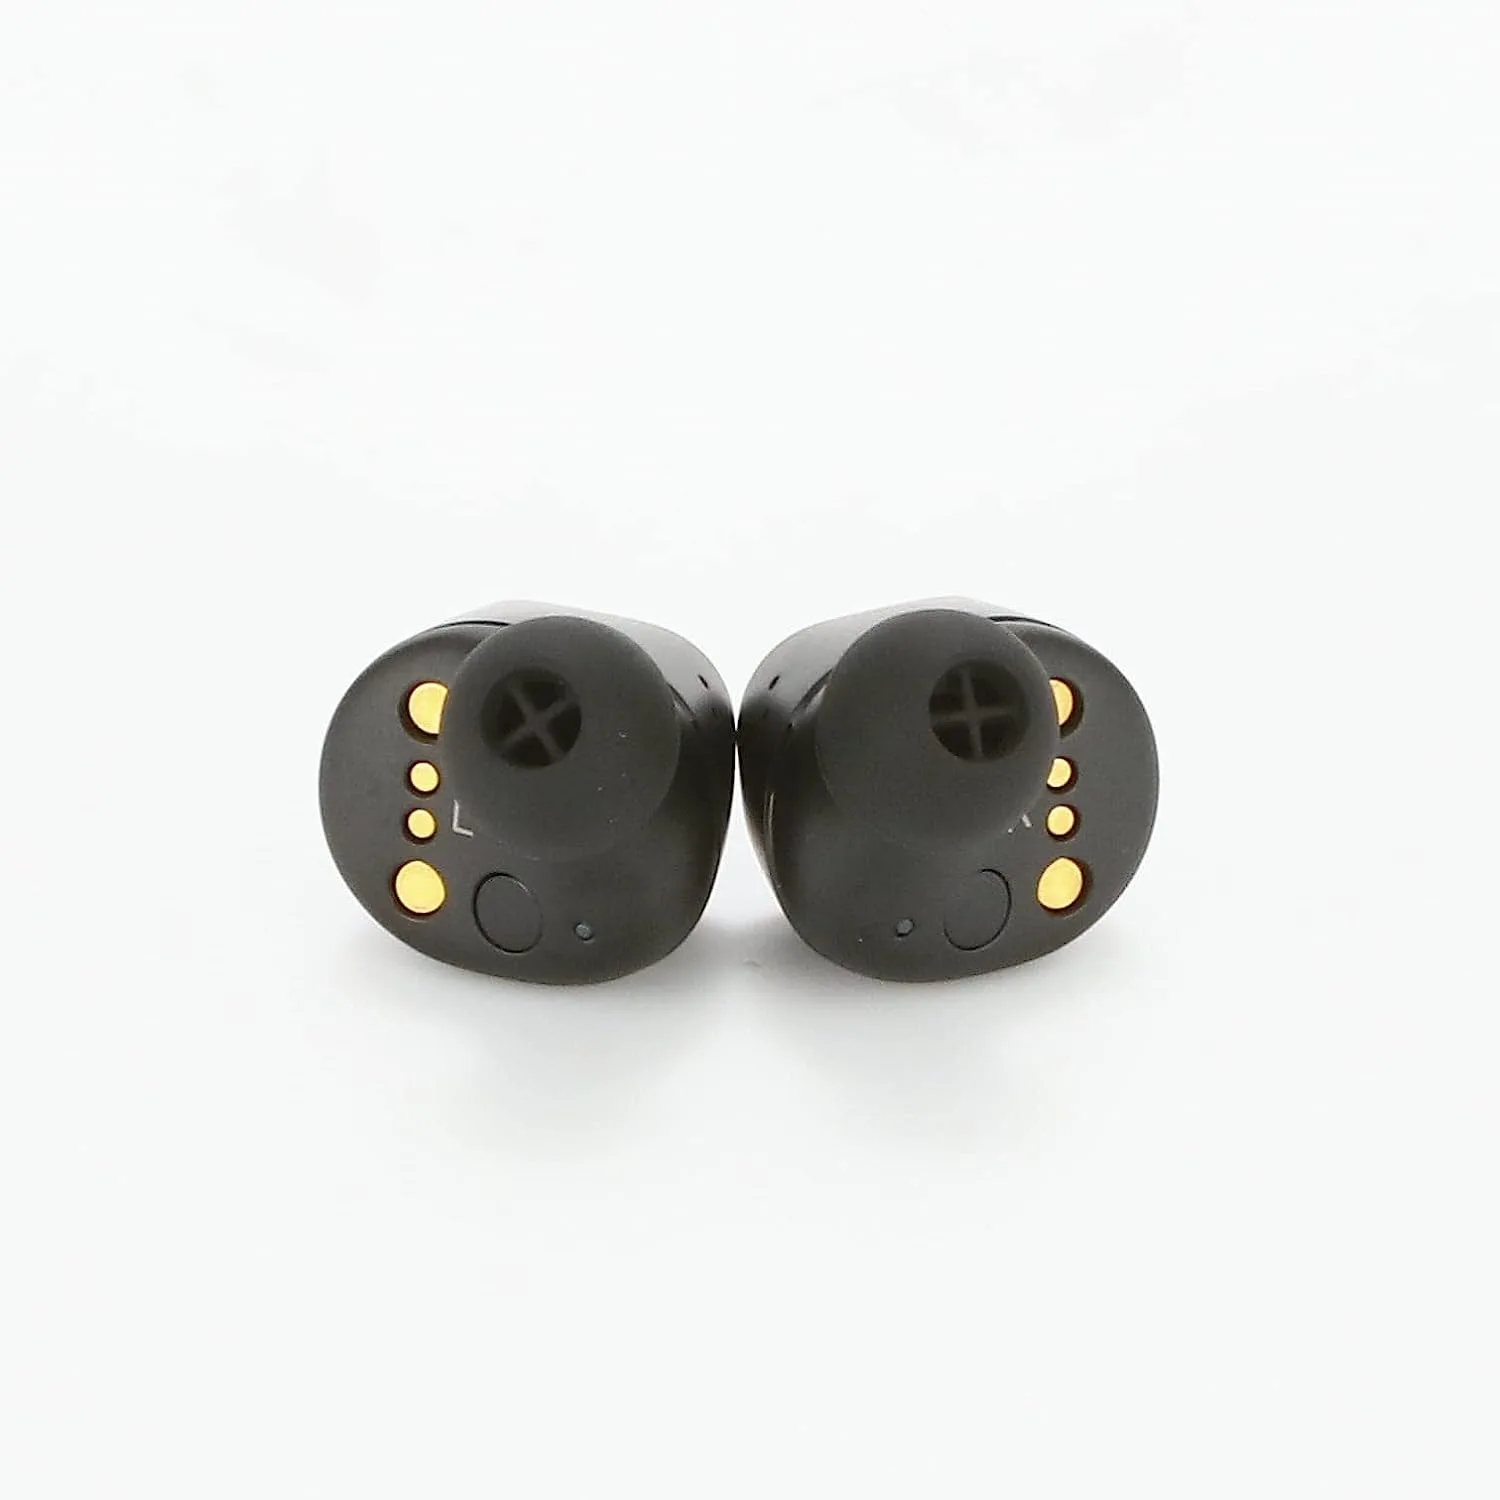 Best ANC earbuds